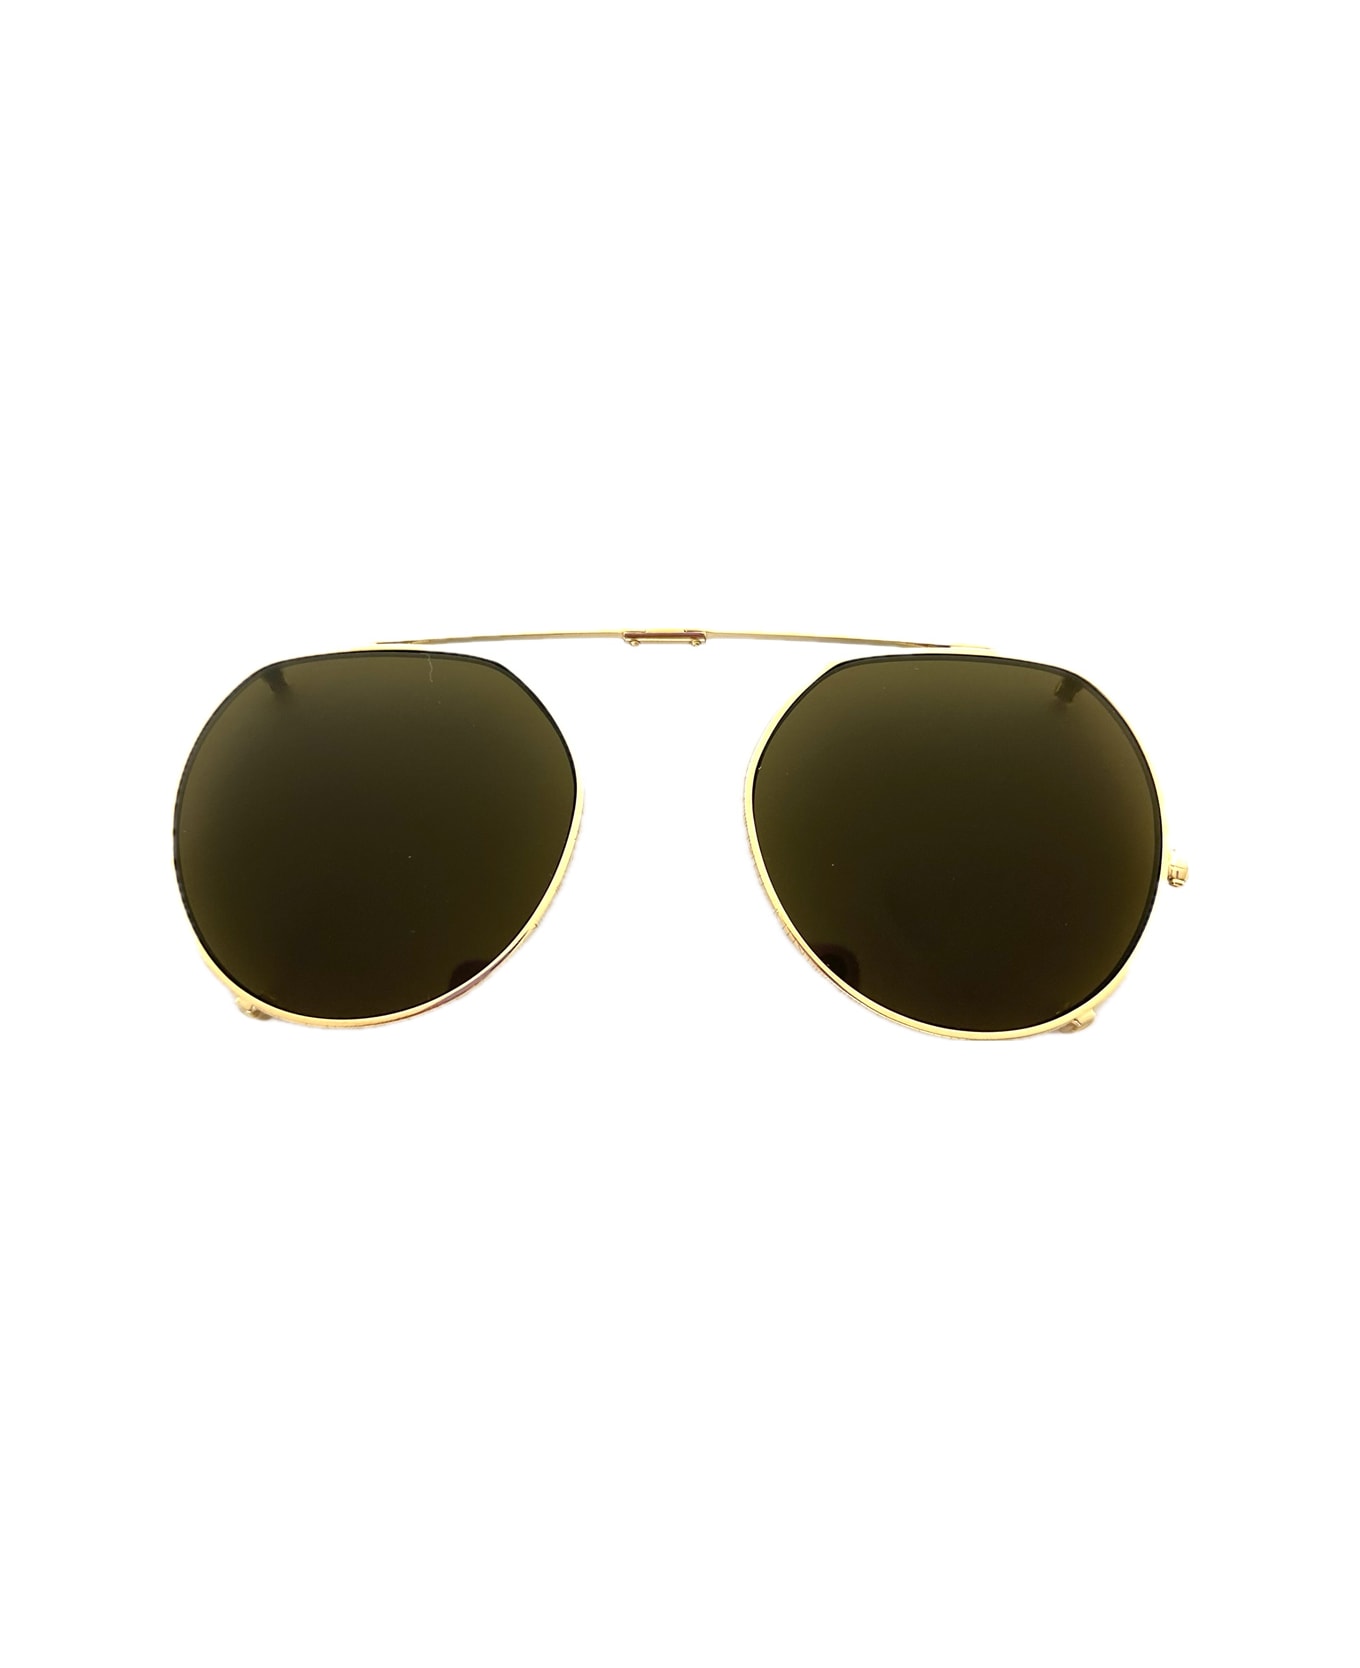 AHLEM Place Dauphine Clip Champagne Sunglasses - Oro サングラス